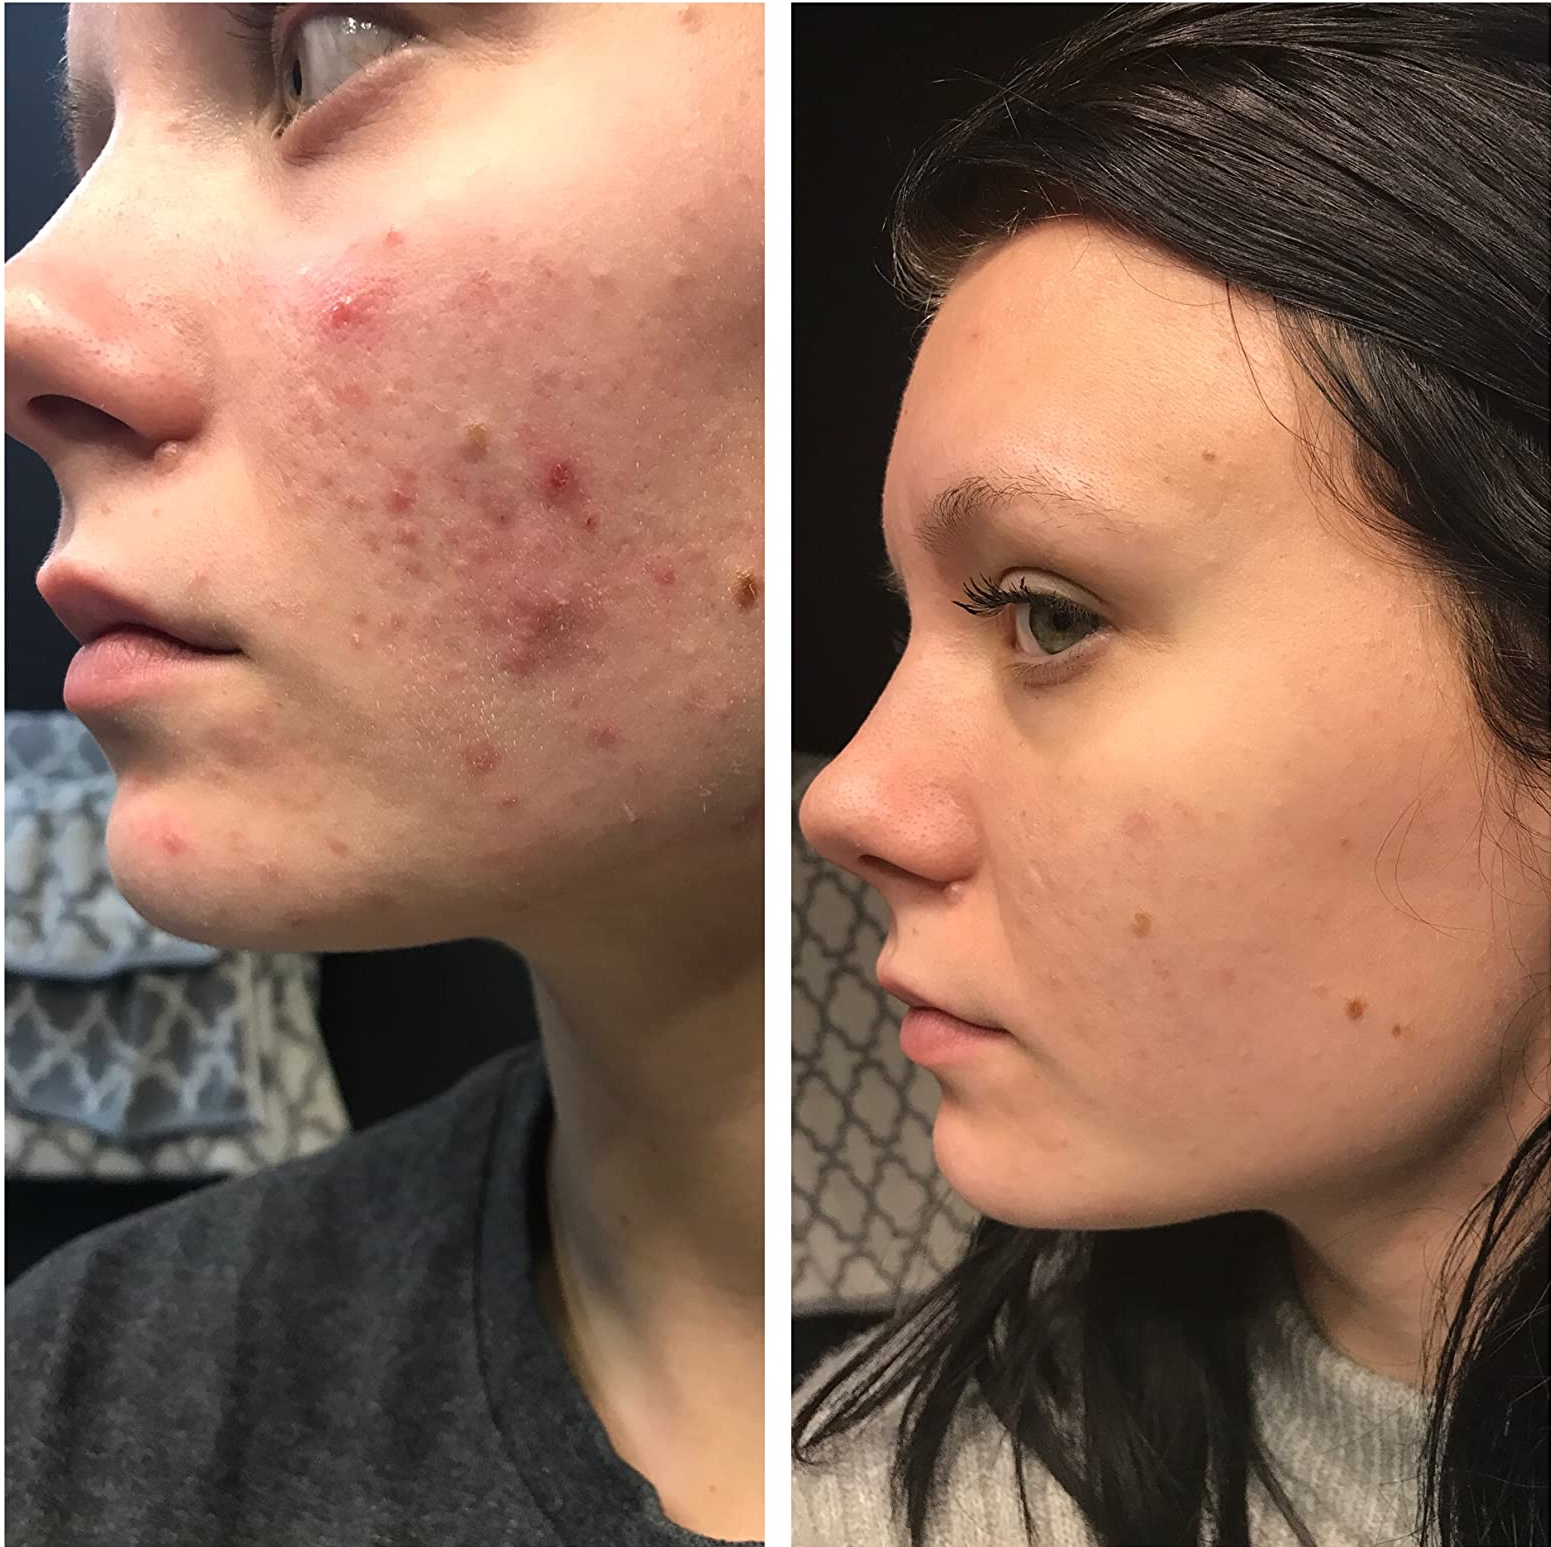 Reviewer showing their skin before and after with less severe acne after using the wash